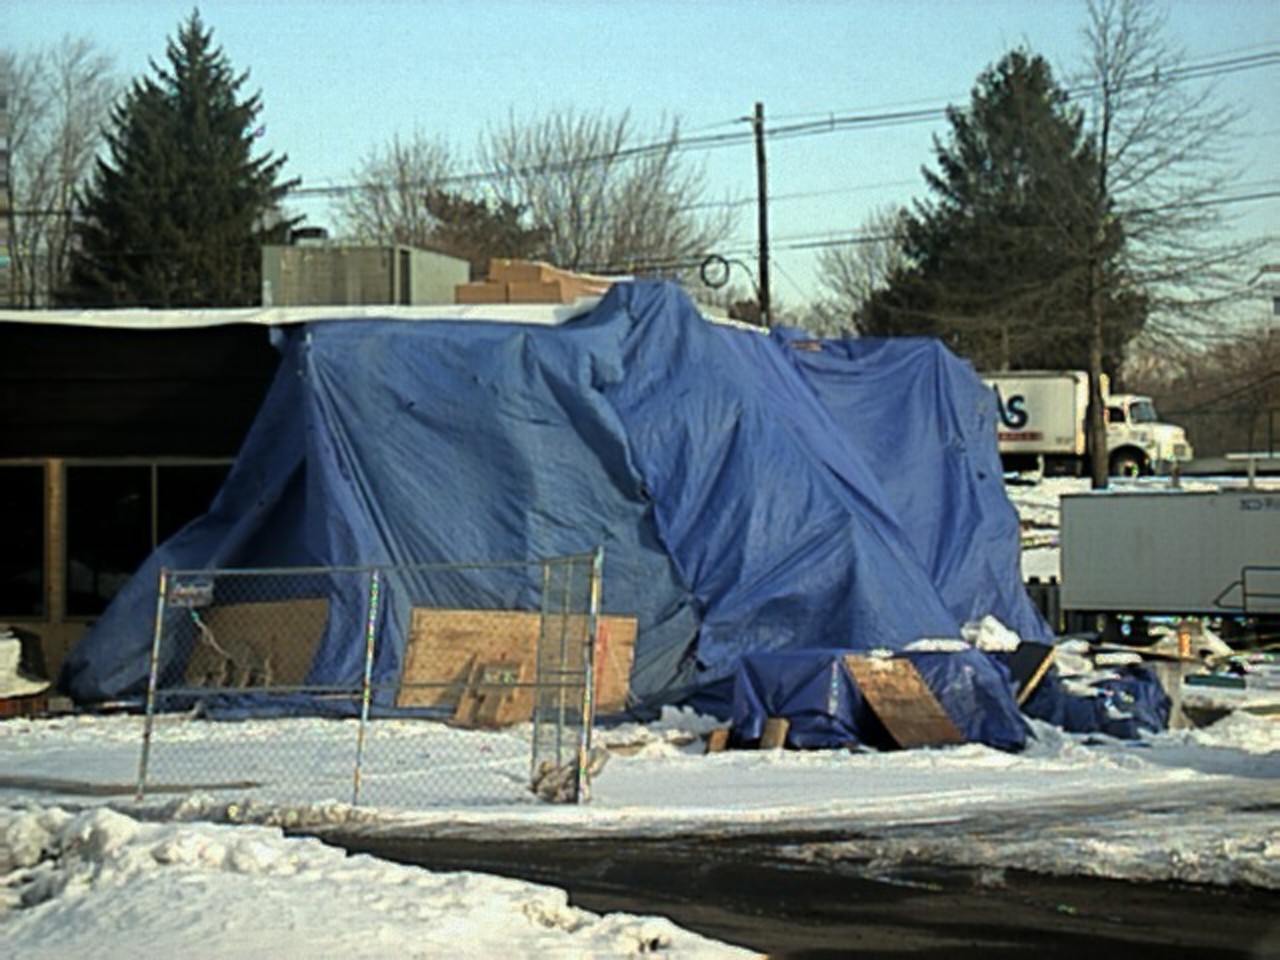 Another view of how the wind sucks the tarps close to the scaffold. It's like being in a giant blue lung.